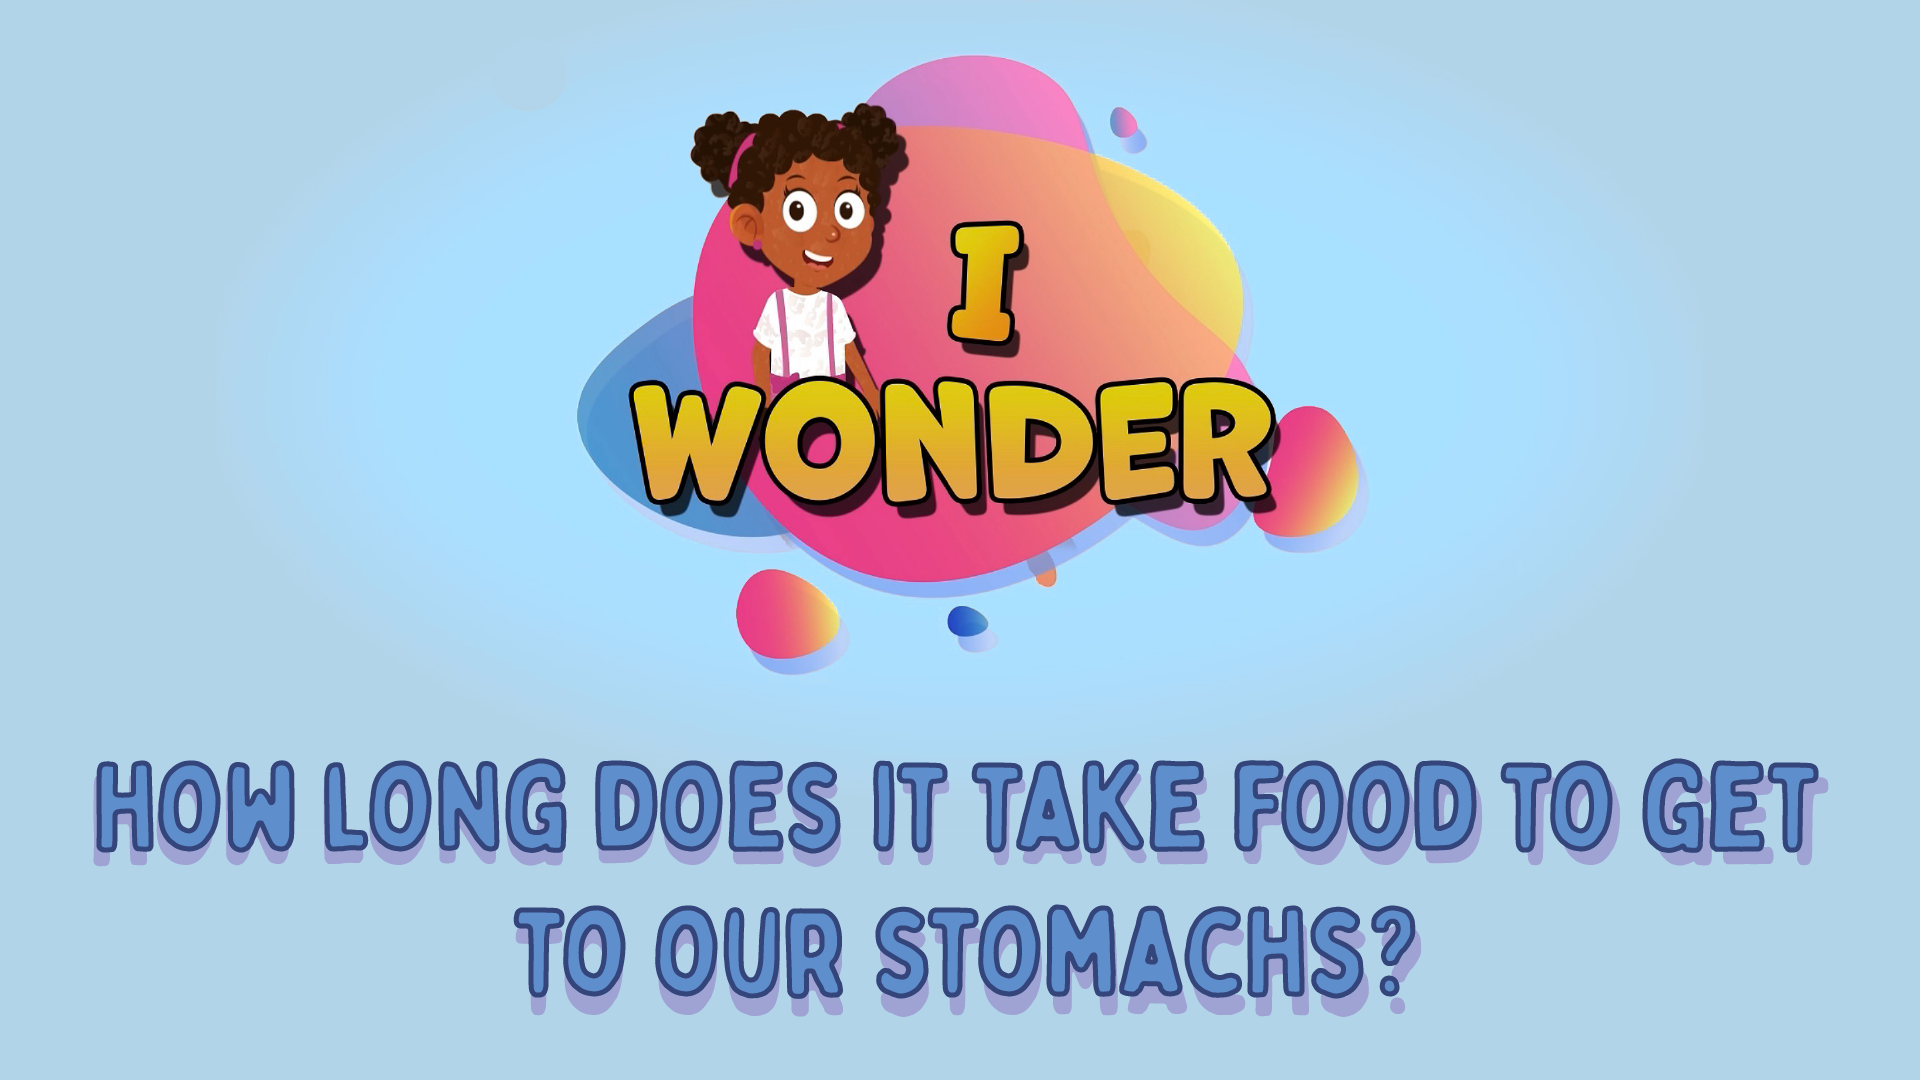 How Long Does It Take For Food To Get To Our Stomachs?